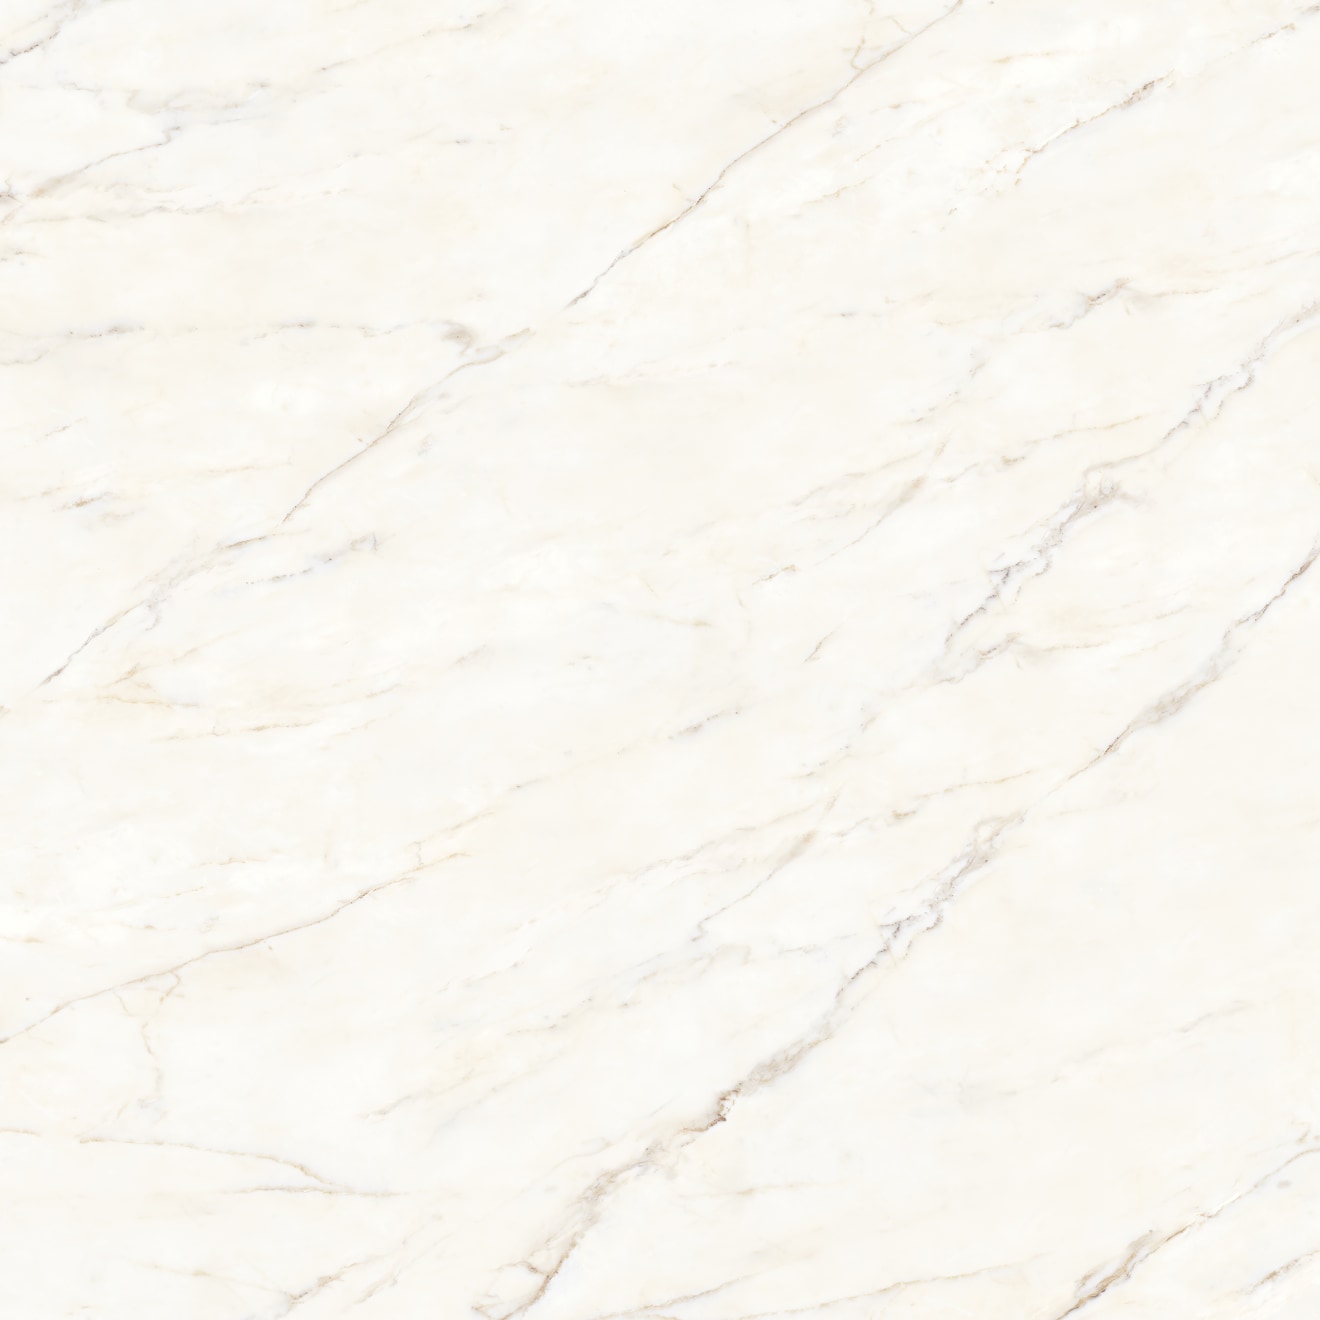 Magnifica The Thirties 30" x 30" - 8mm Honed Porcelain Tile in Calacatta Oro | Bedrosians Tile and Stone